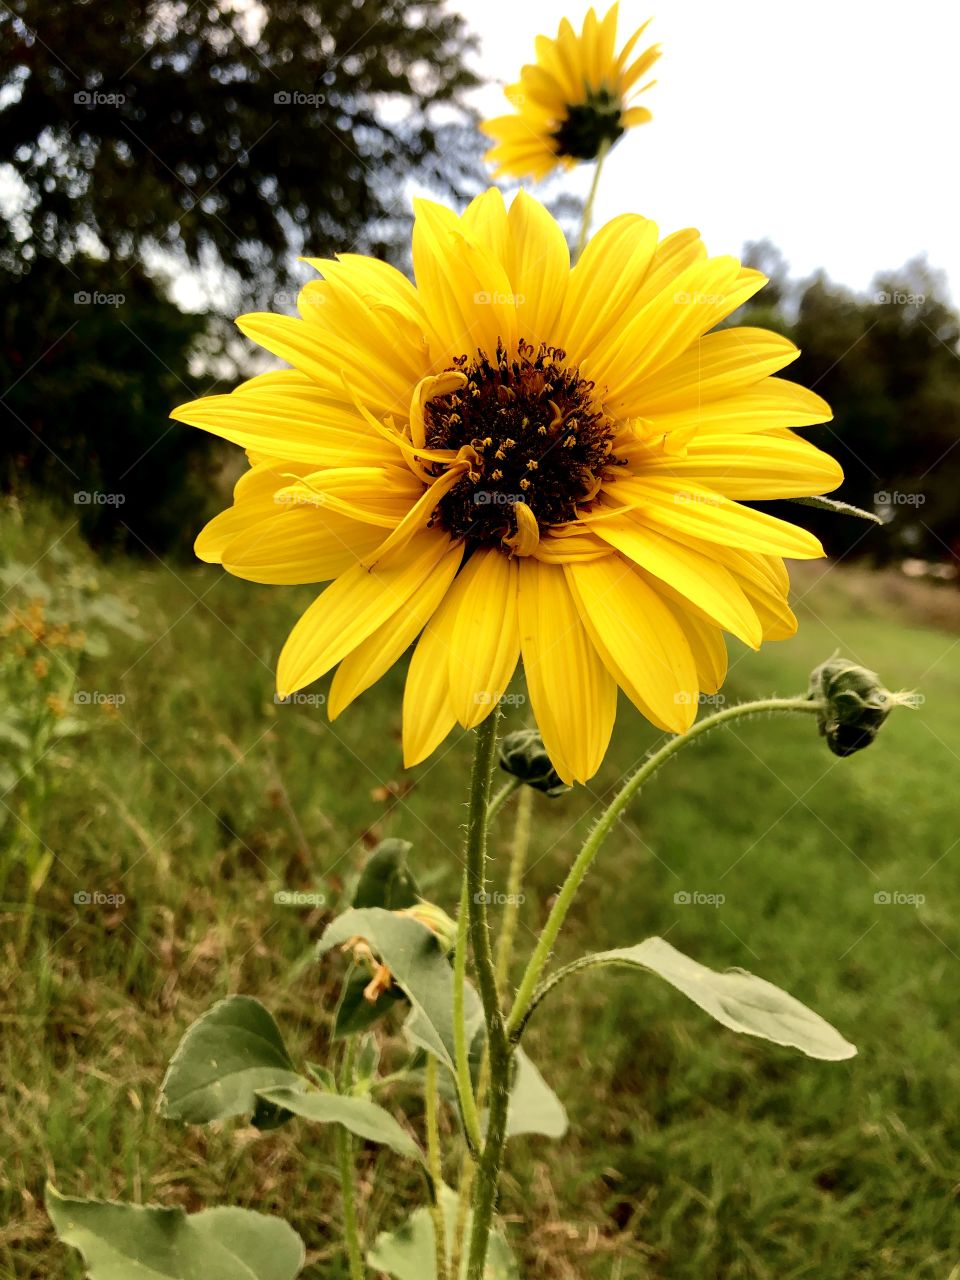 With summer comes sunflowers. Brighten anyone’s day or any room with this bright beautiful sunflower. Yellow sure looks perfect out in the wild. 